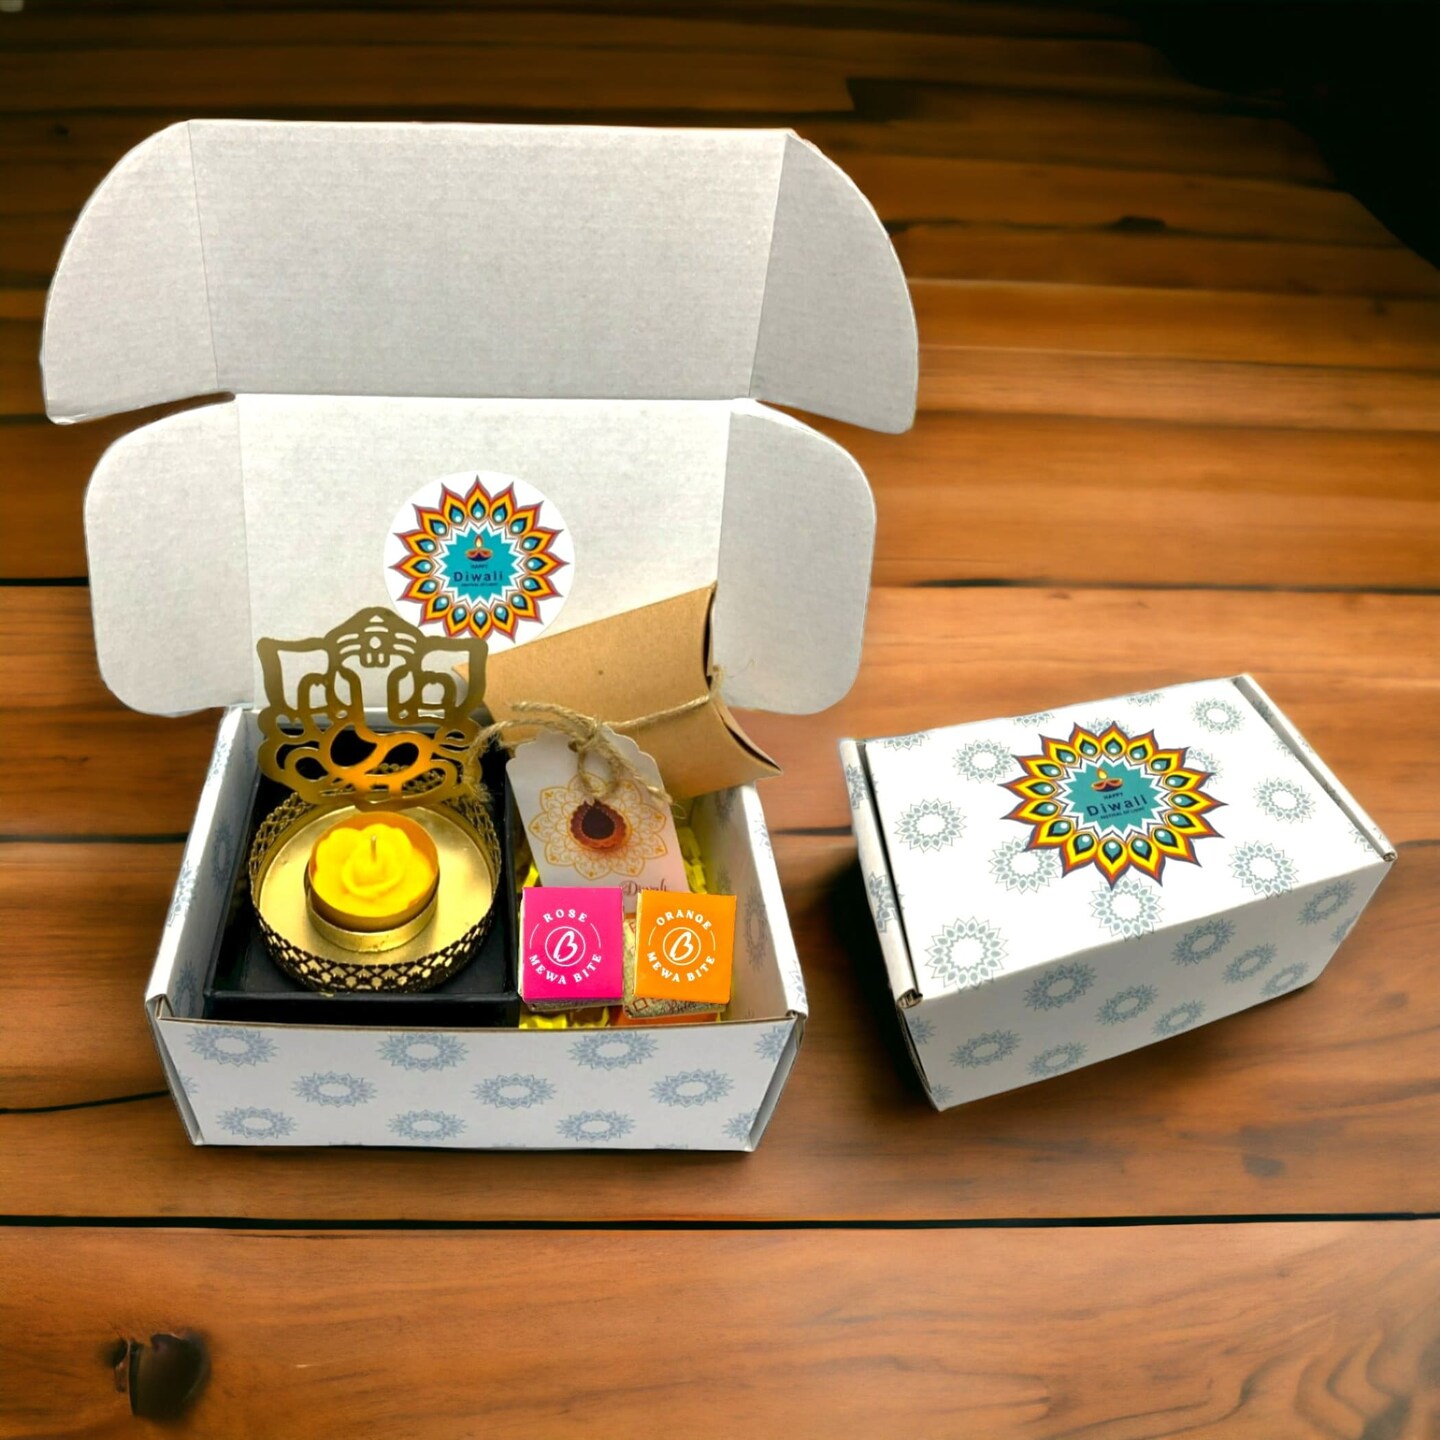 Personalized Diwali Gifts Hamper Indian Diwali Gift Boxes Navratri Gift Box Hamper Basket Sweets Dry Fruits For Employees Home Office Friends Family &#x26; Relatives Handmade Return Gifts Items